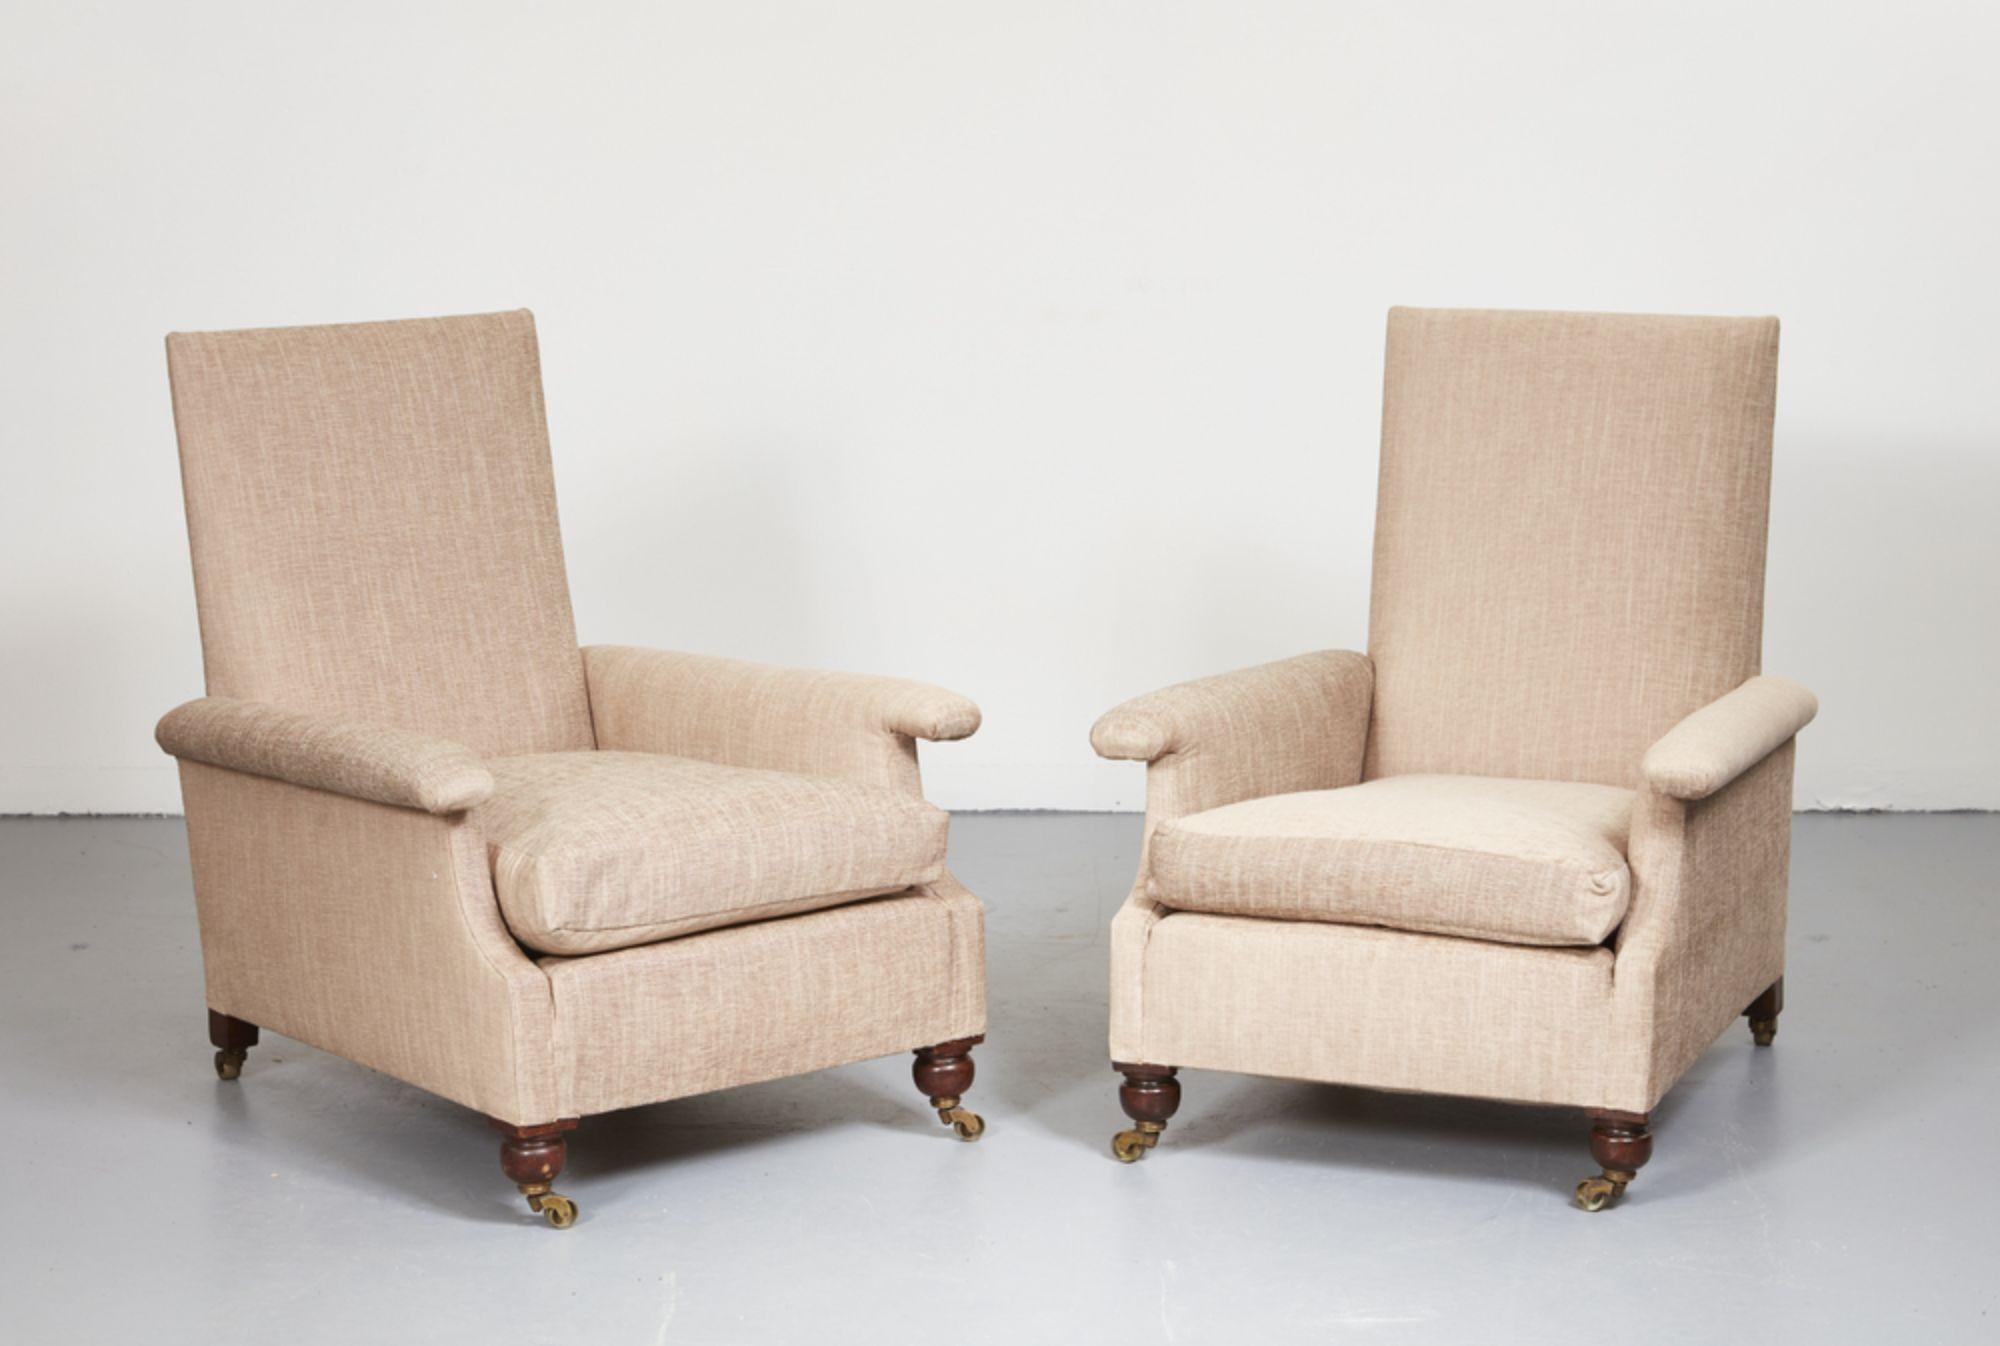 19th Century Pair of Generously Proportioned English Country House Club Chairs For Sale